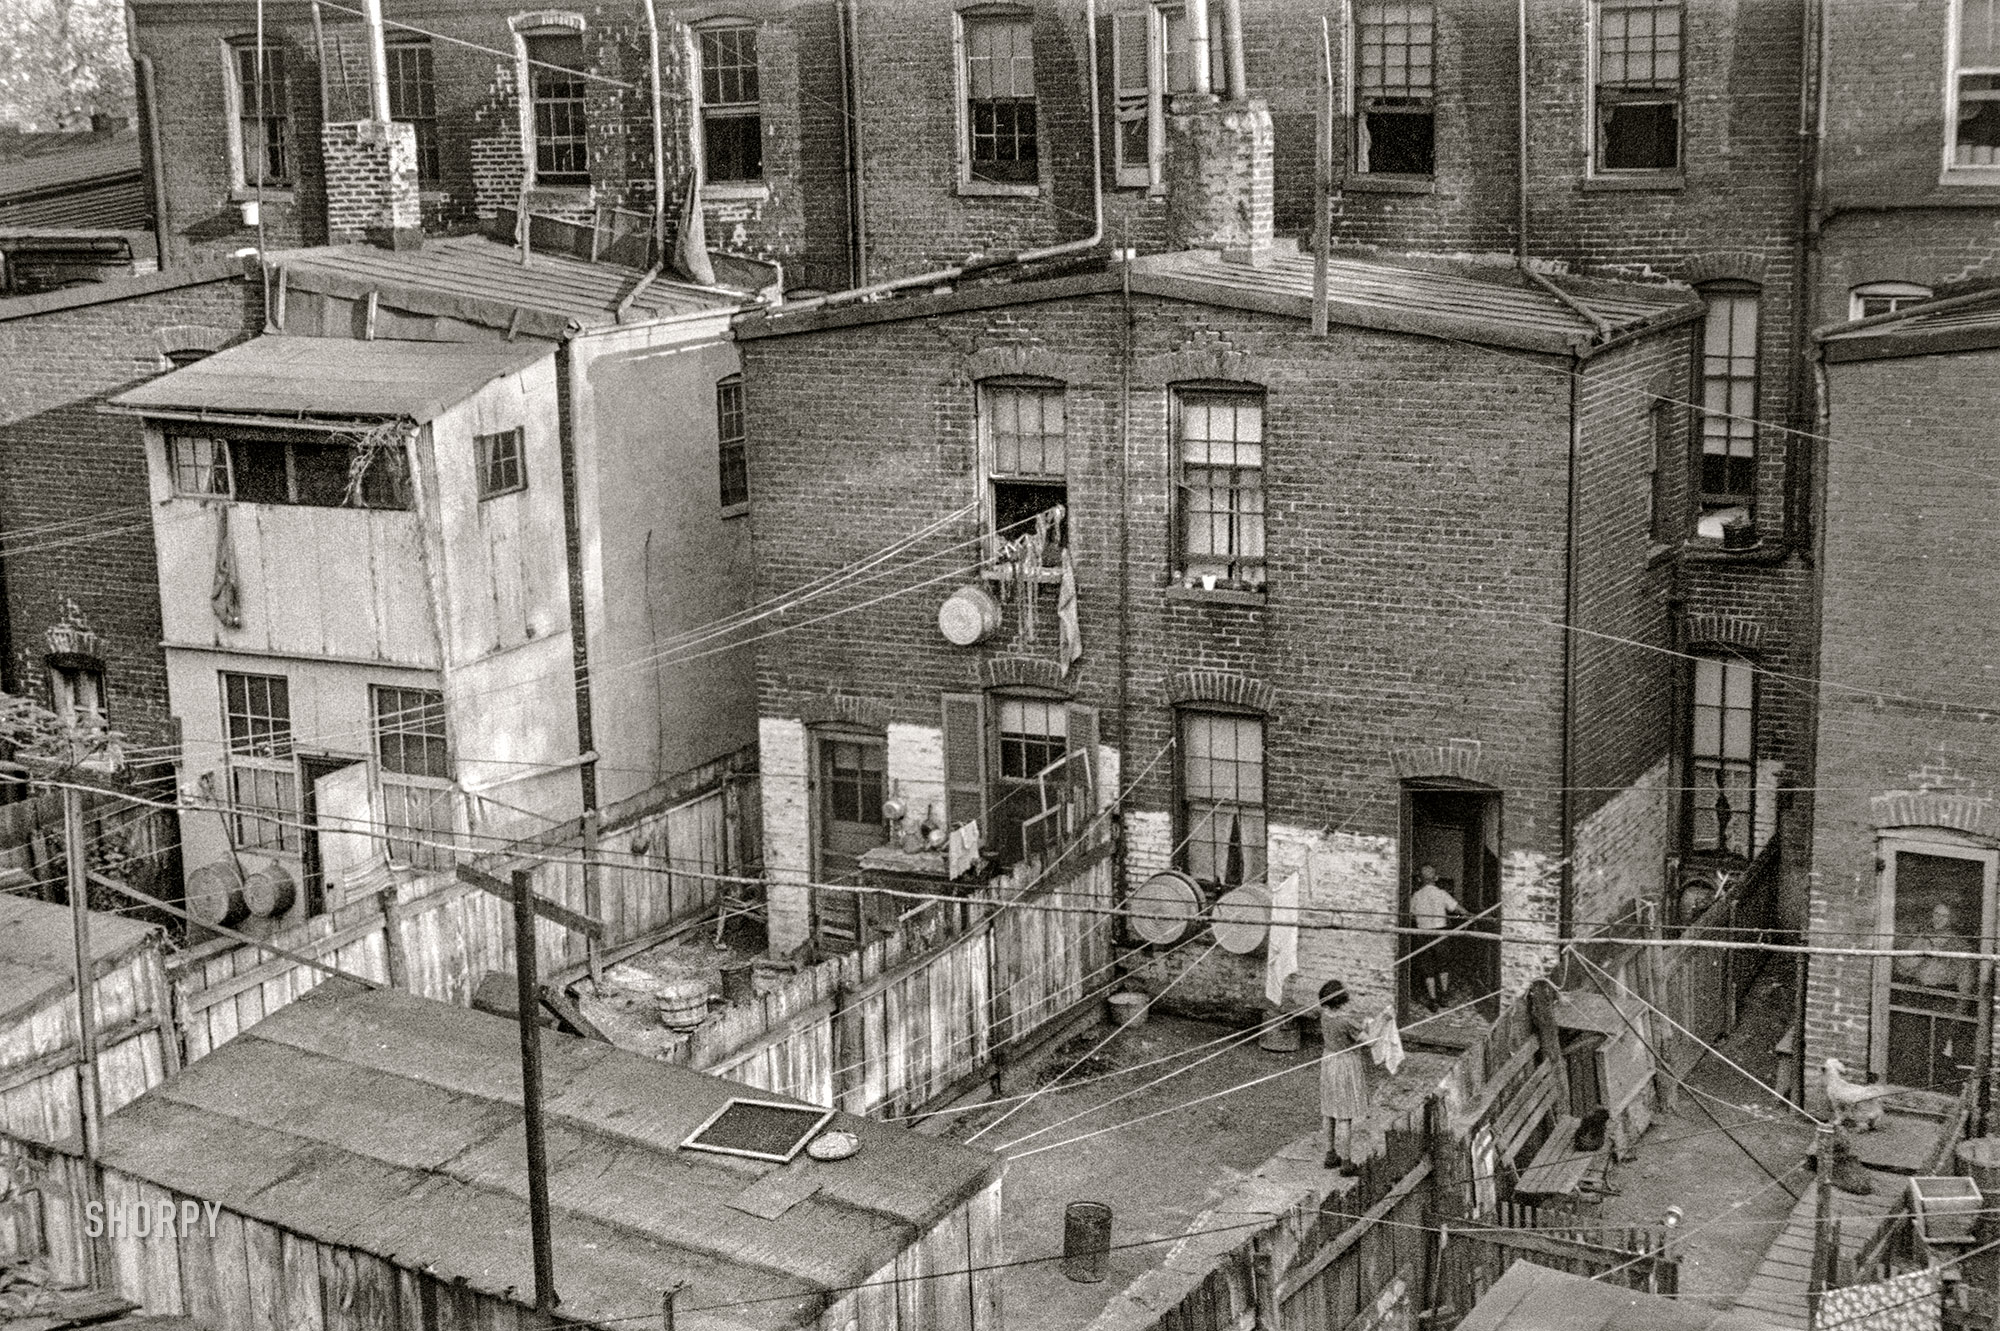 &nbsp; &nbsp; &nbsp; &nbsp; Almost 40 years later, a view of the back yards last seen here.
Washington, D.C., 1939. "A view of backyards of apartment houses where both white and Negro families are living." 35mm nitrate negative by David Moffat Myers. View full size.